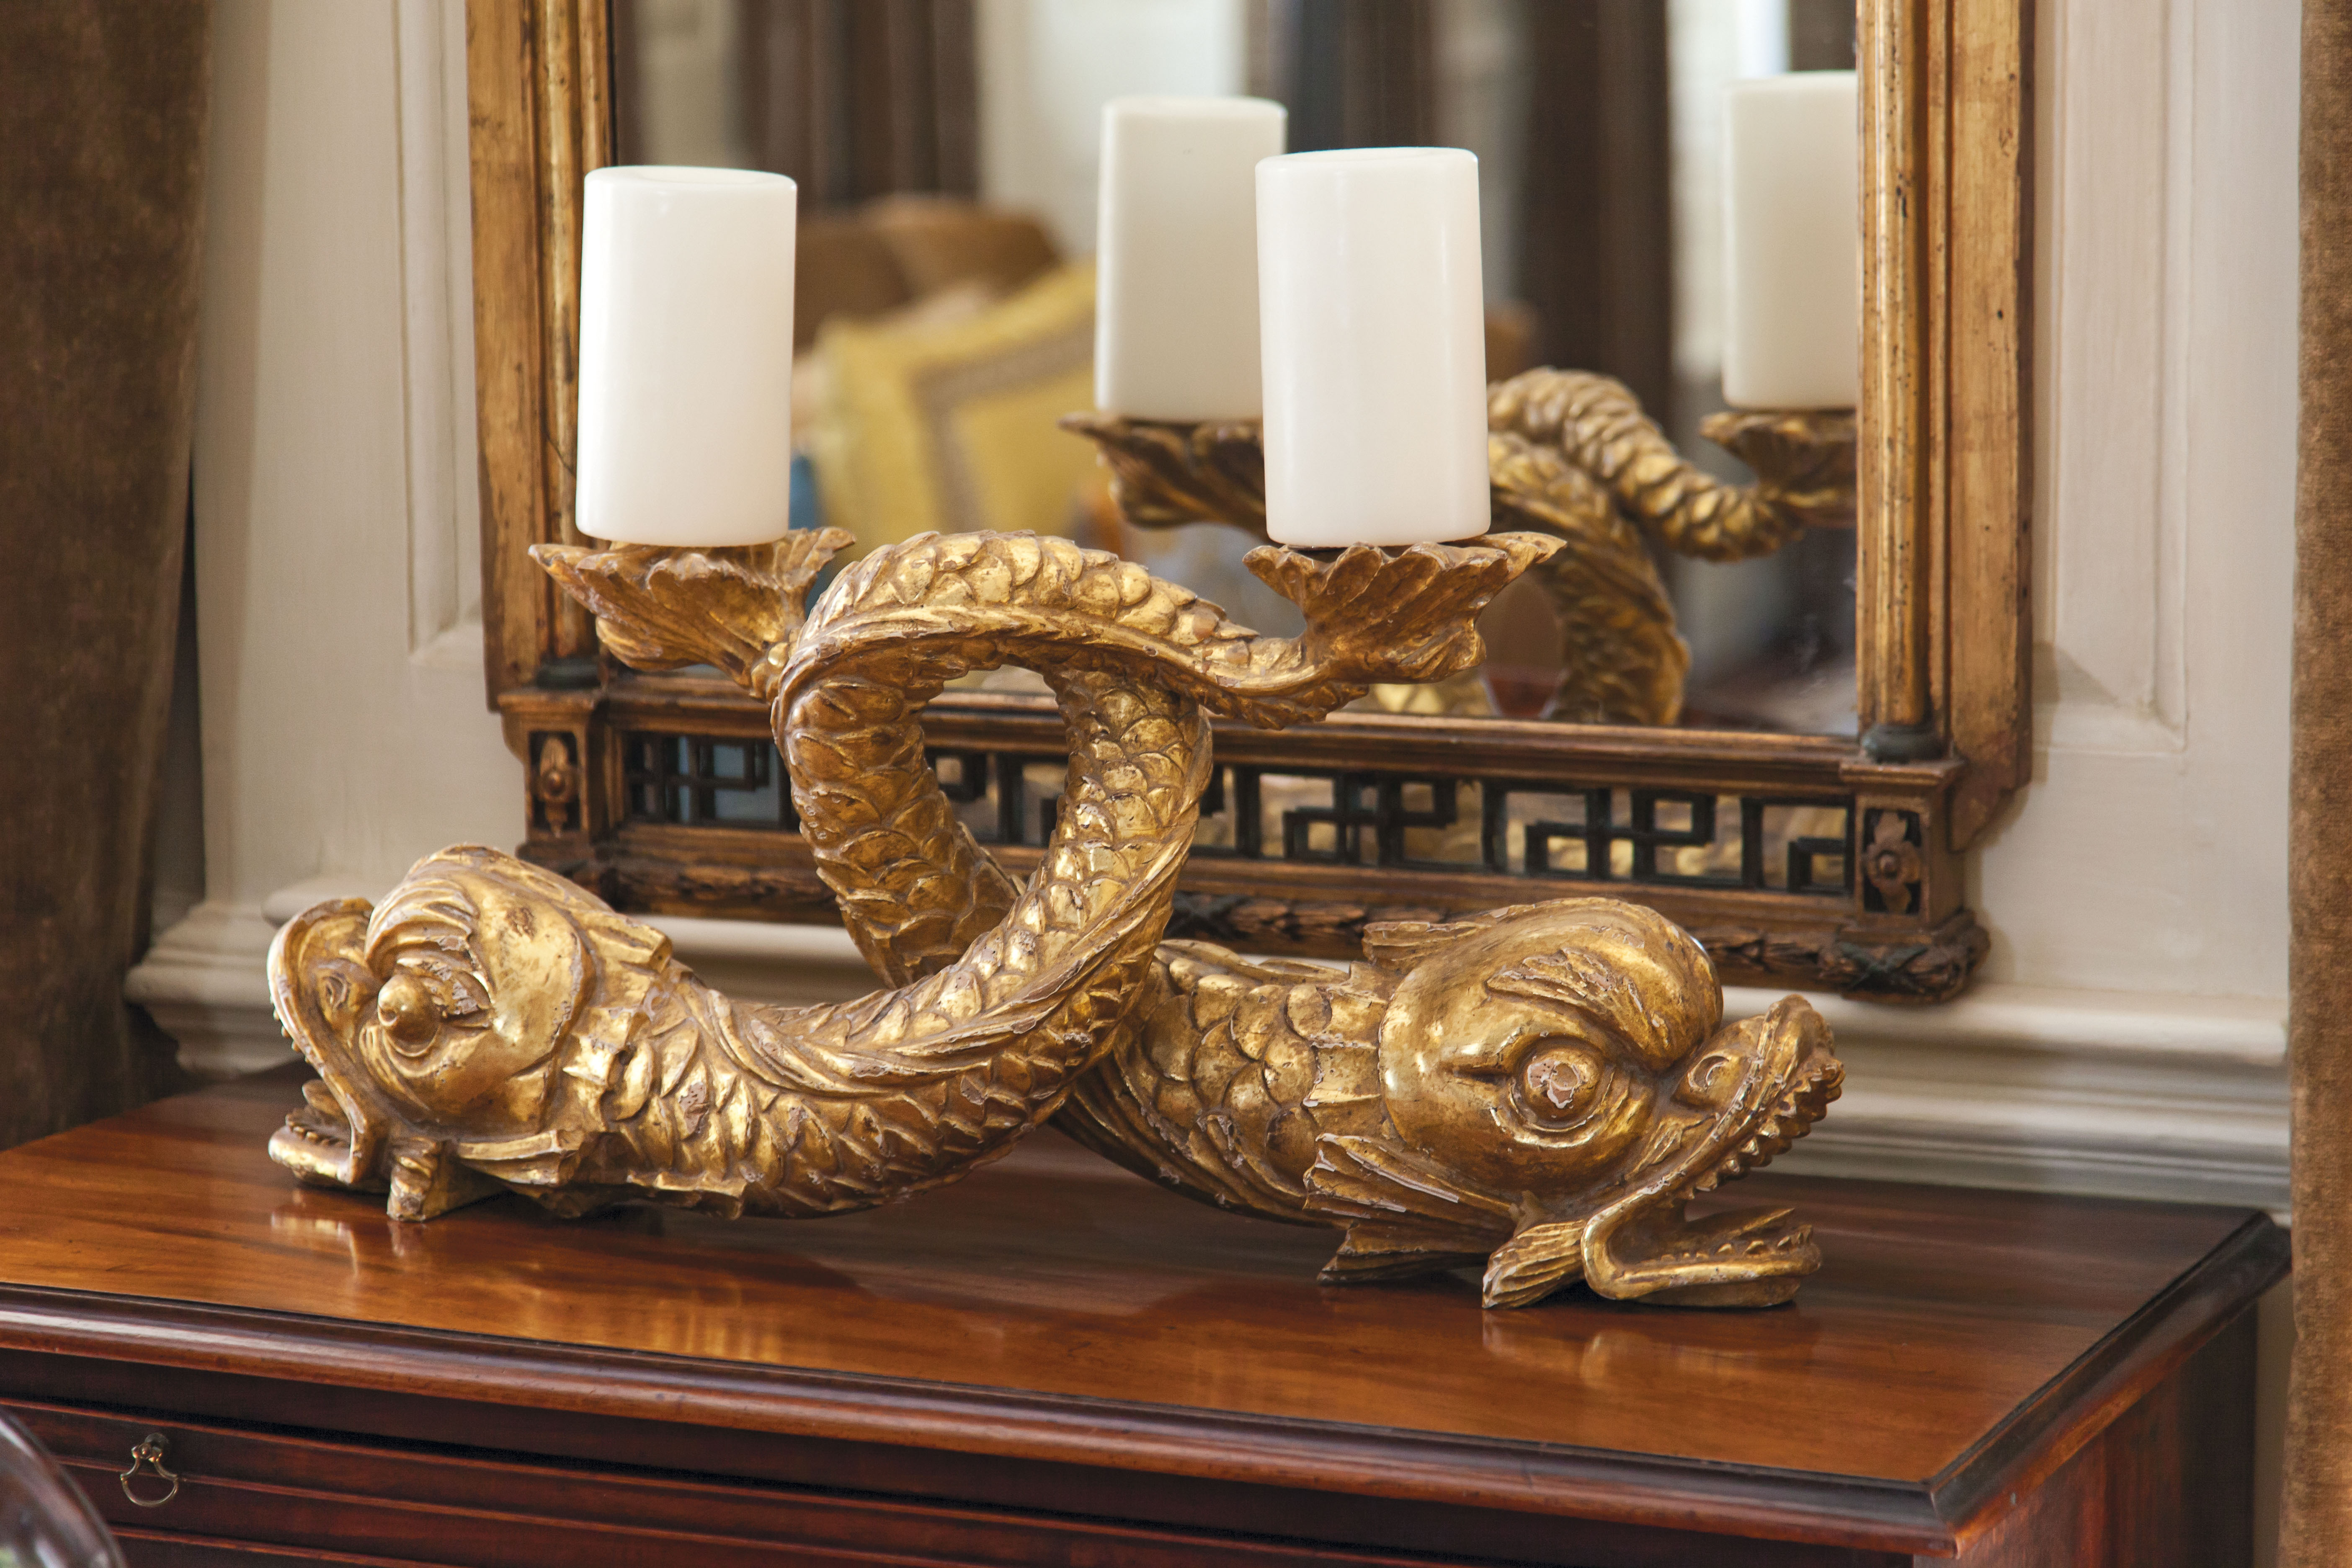 Circa-18th-century stylized gilt dolphins found through G. Sergeant Antiques play nicely off the gold tones seen throughout.